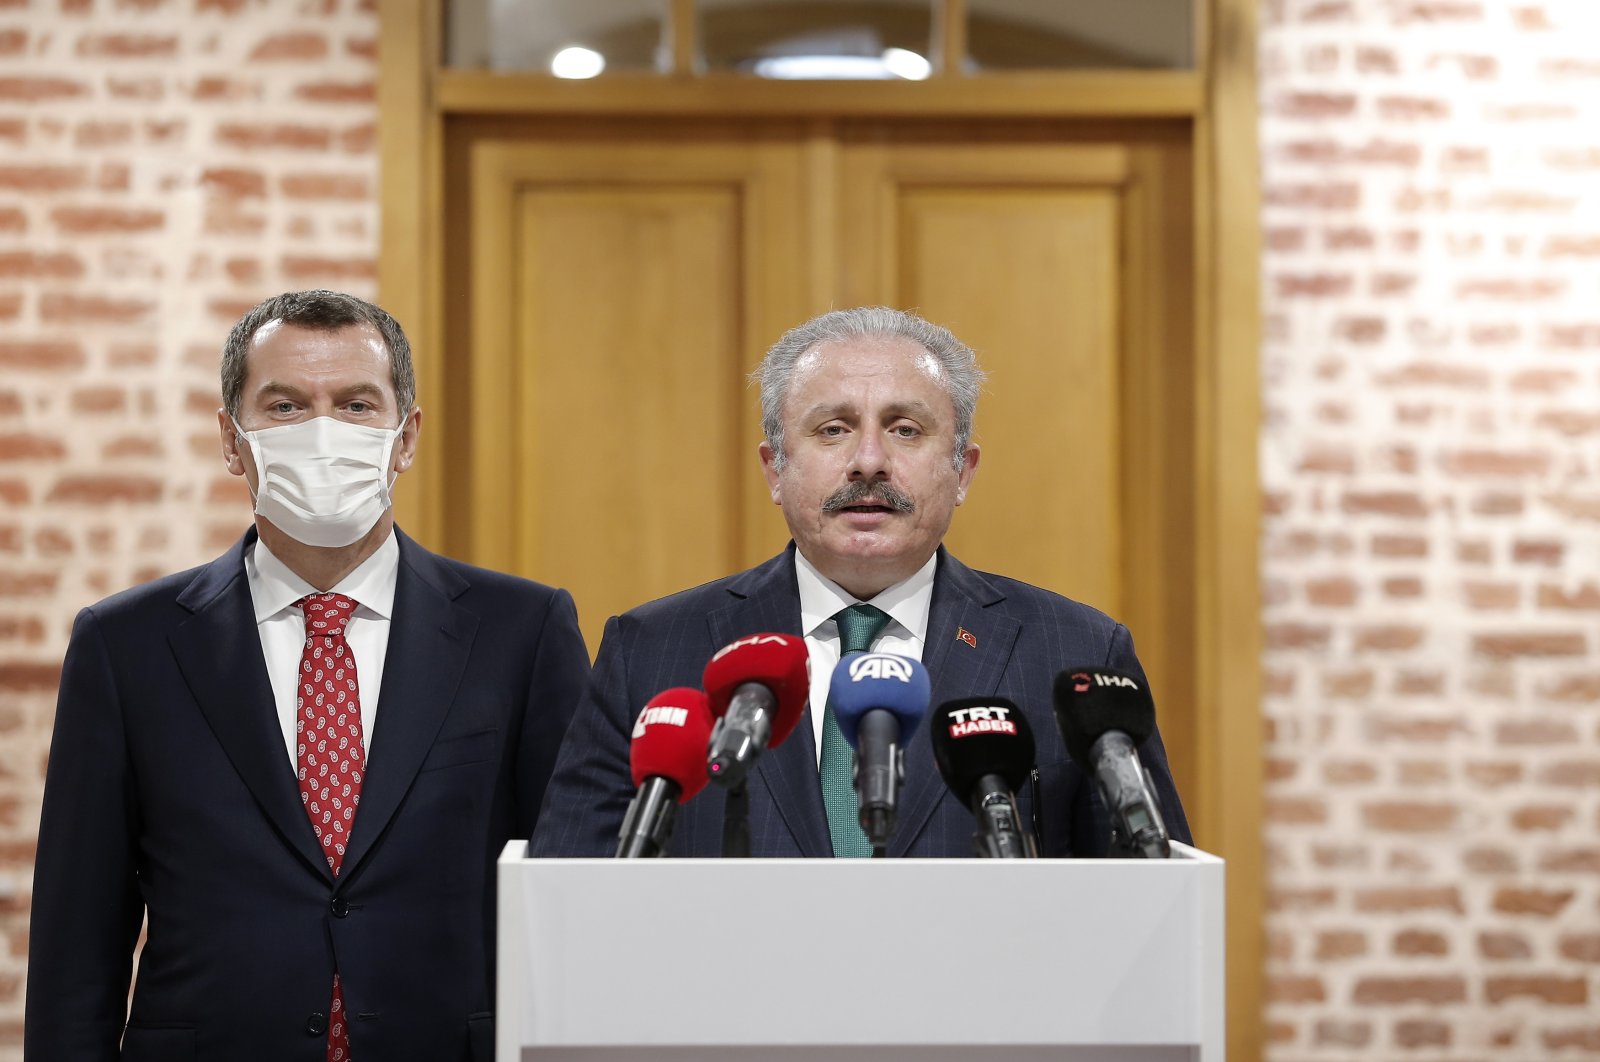 Turkish Parliament Speaker Mustafa Şentop speaks at a news conference at an exhibition in the Kazlıçeşme district of Istanbul, Nov. 7, 2020 (AA Photo)